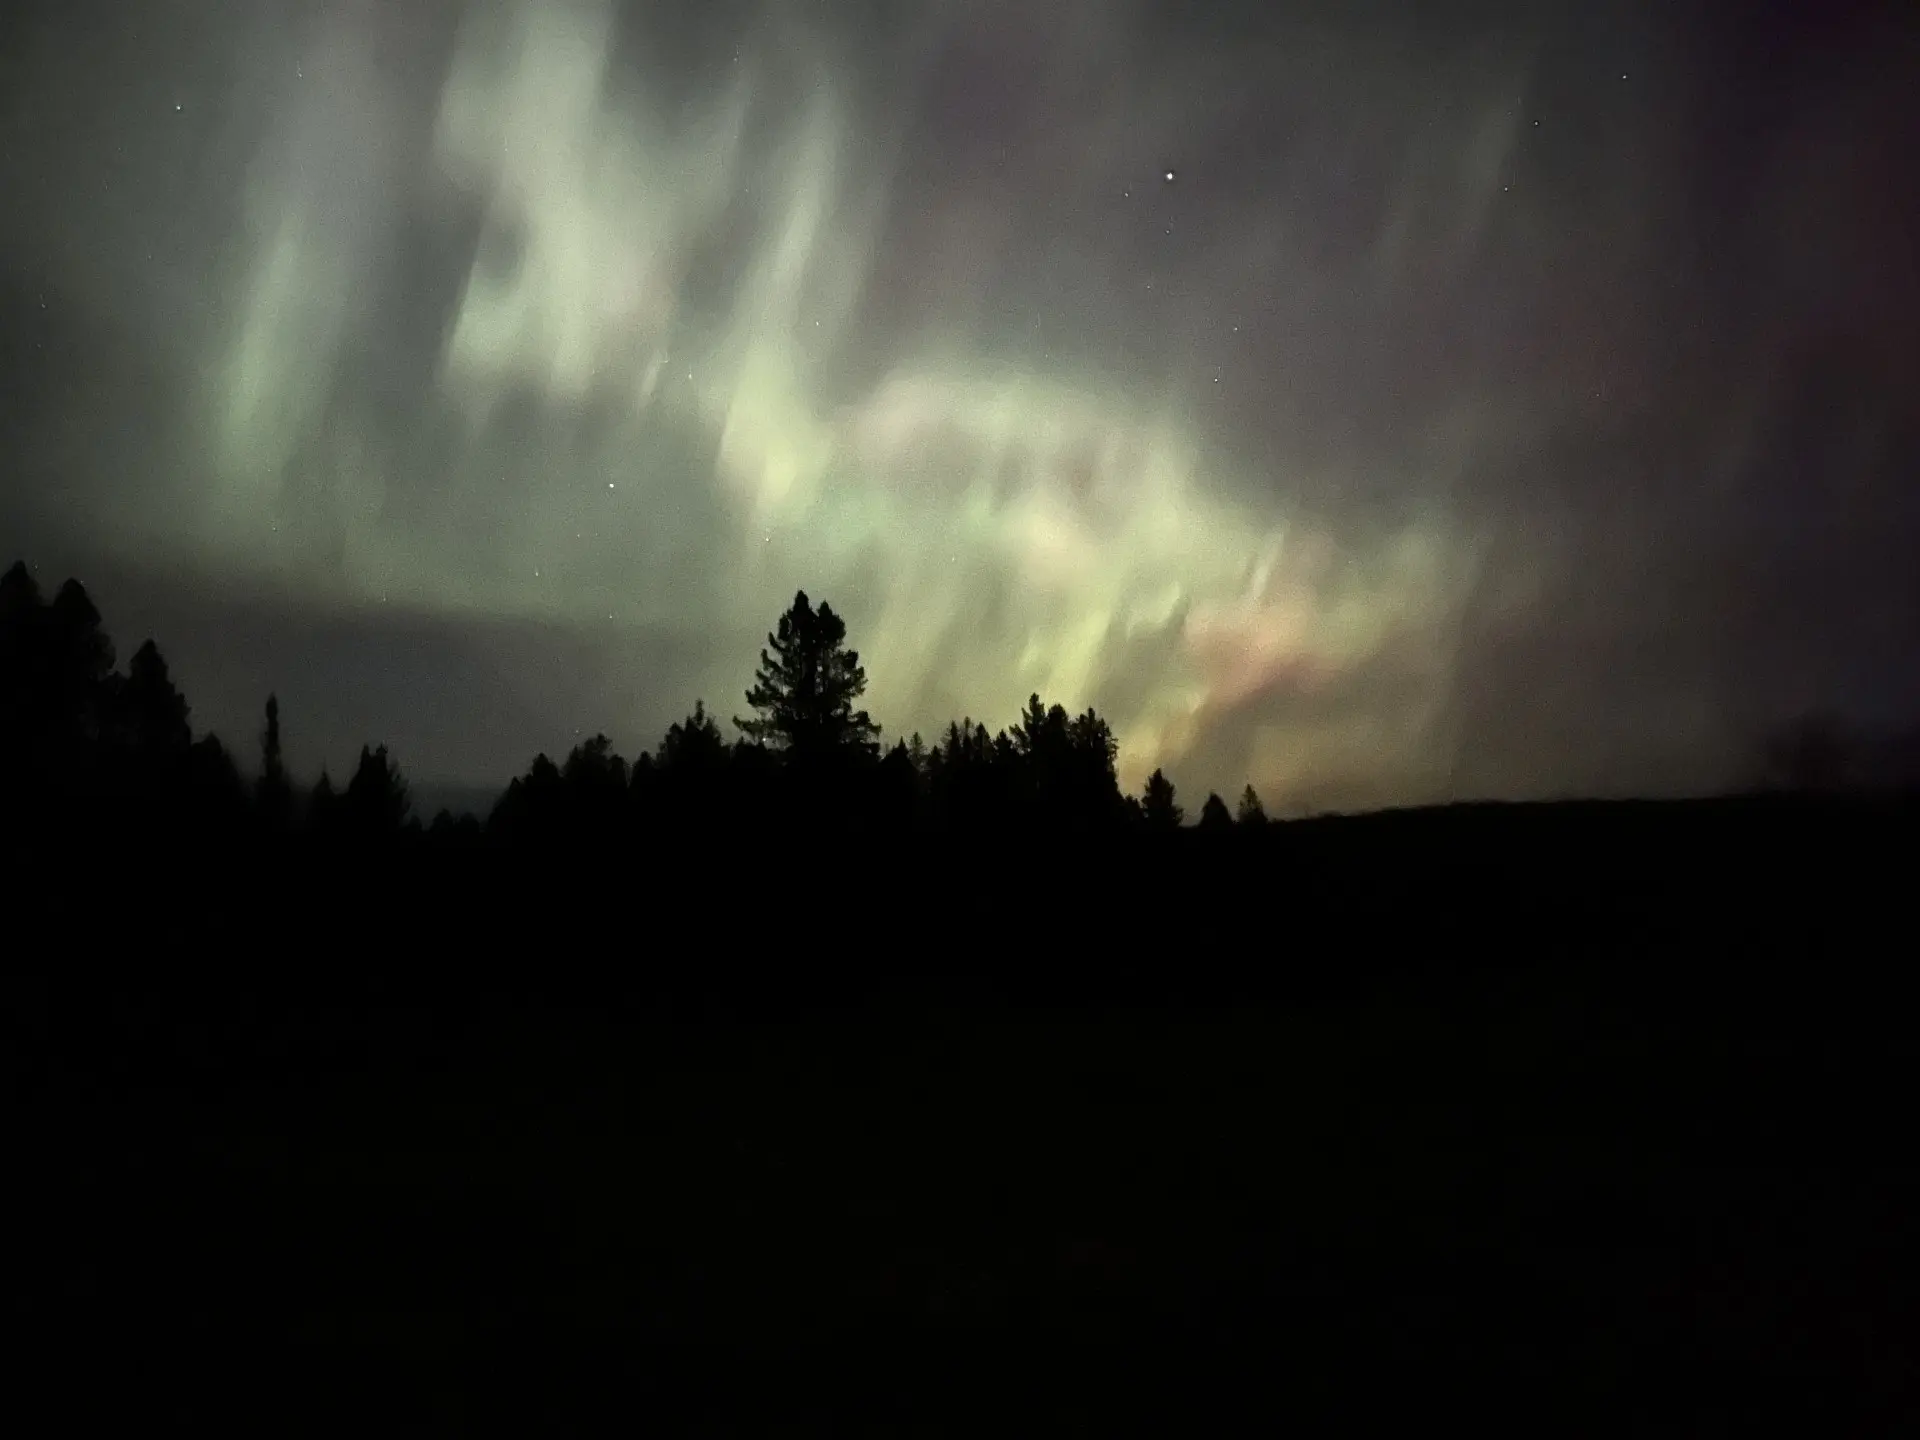 The Northern Lights may shine across Canada tonight - The Weather Network